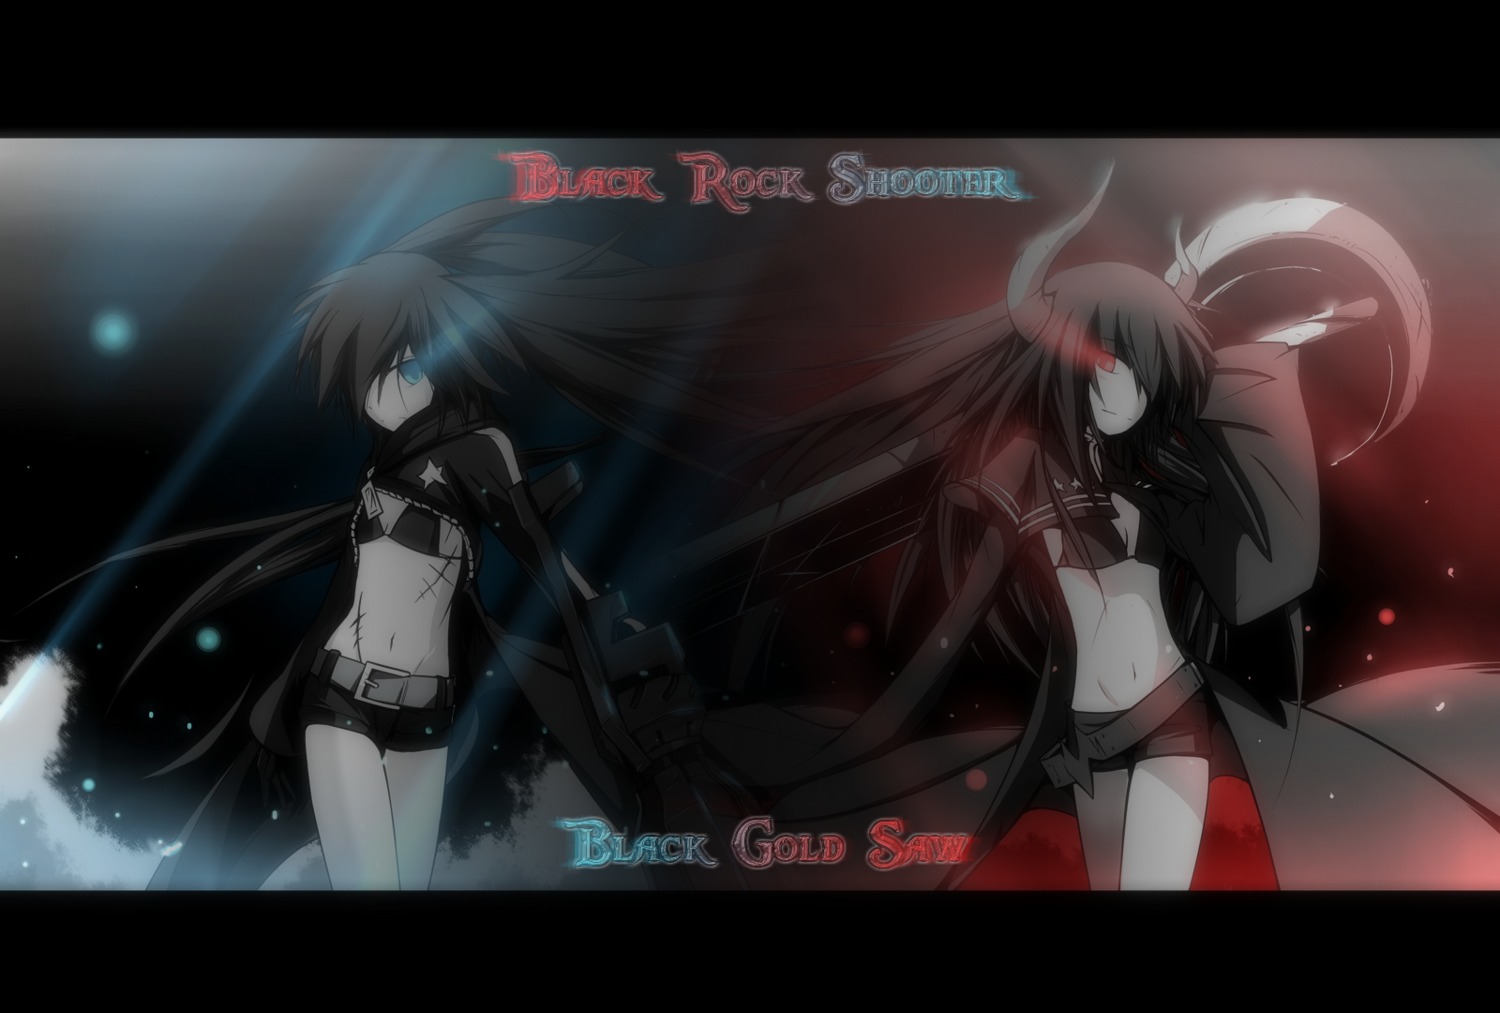 bikini_top black_gold_saw black_rock_shooter black_rock_shooter_(character) cleavage horns swimsuits vocaloid